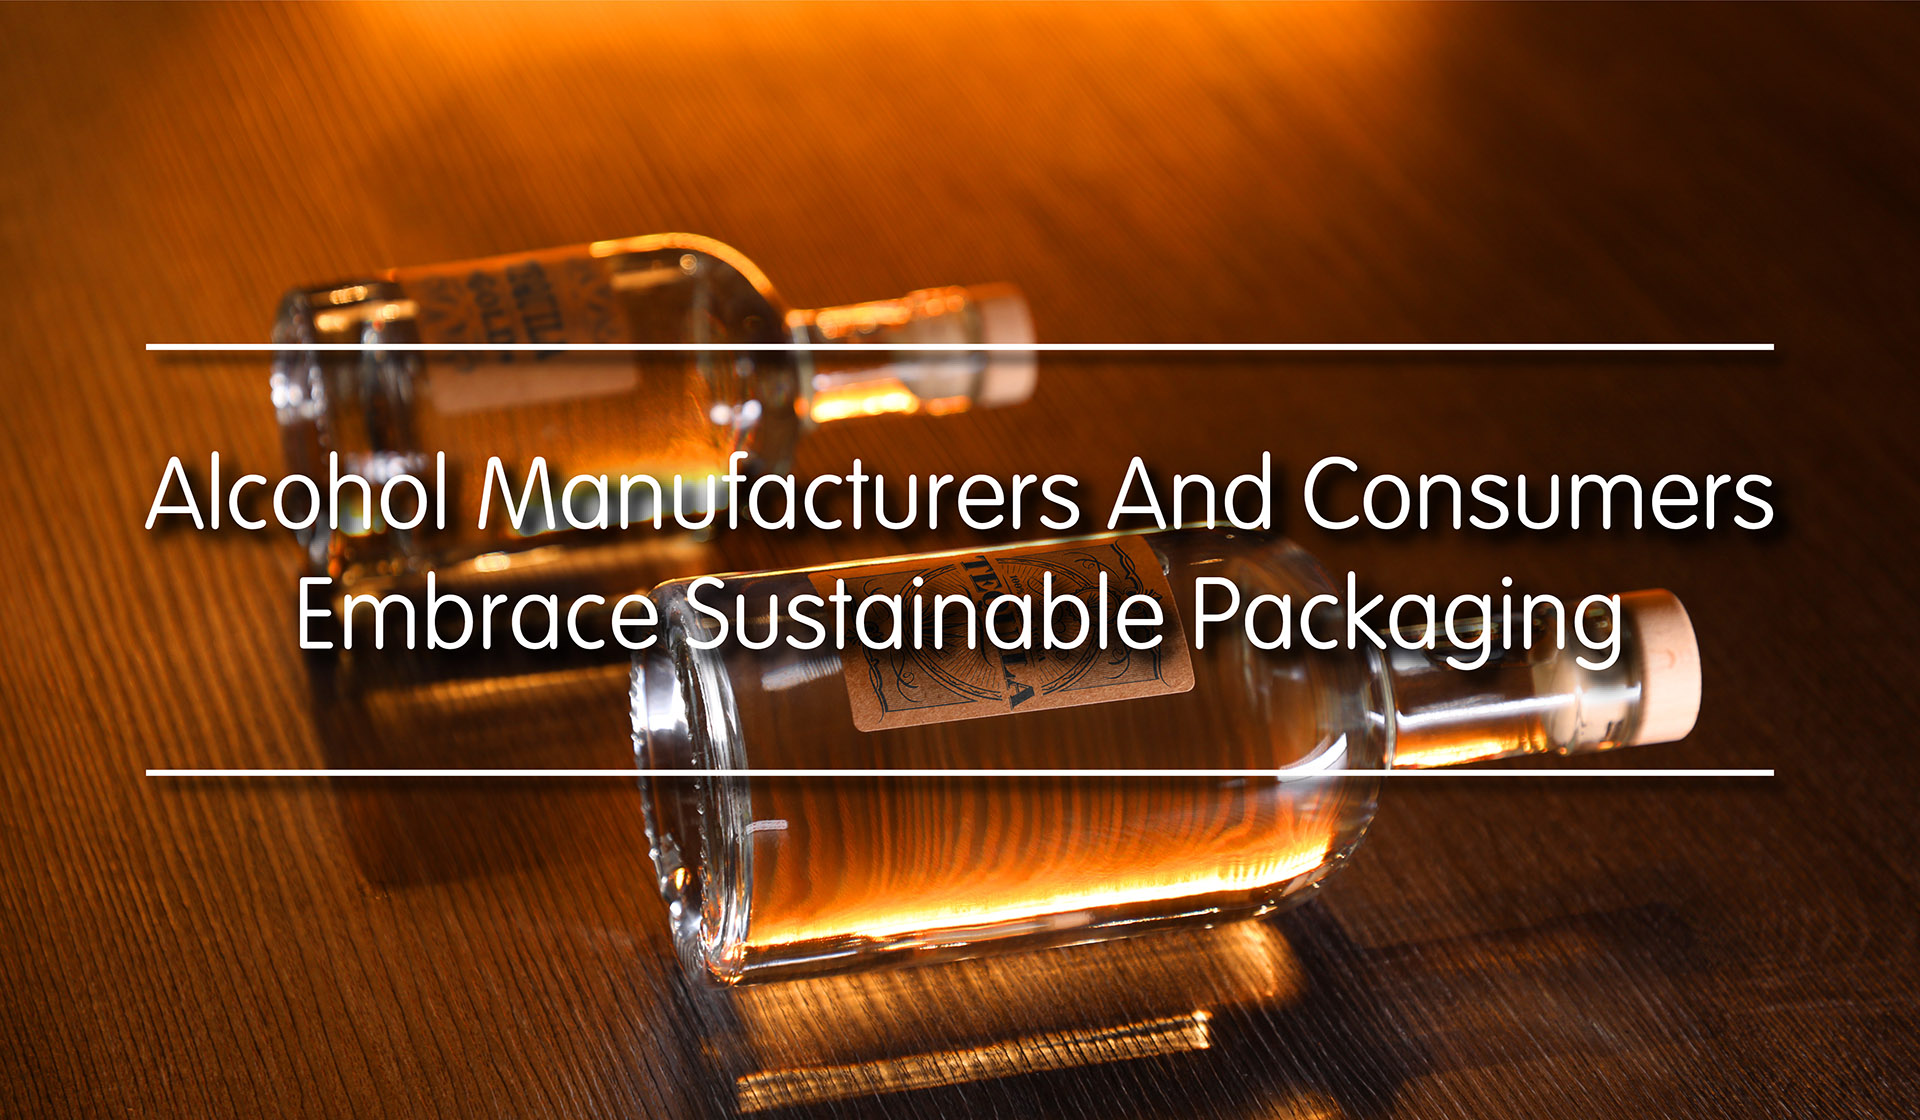 Alcohol Manufacturers and Consumers Embrace Sustainable Packaging